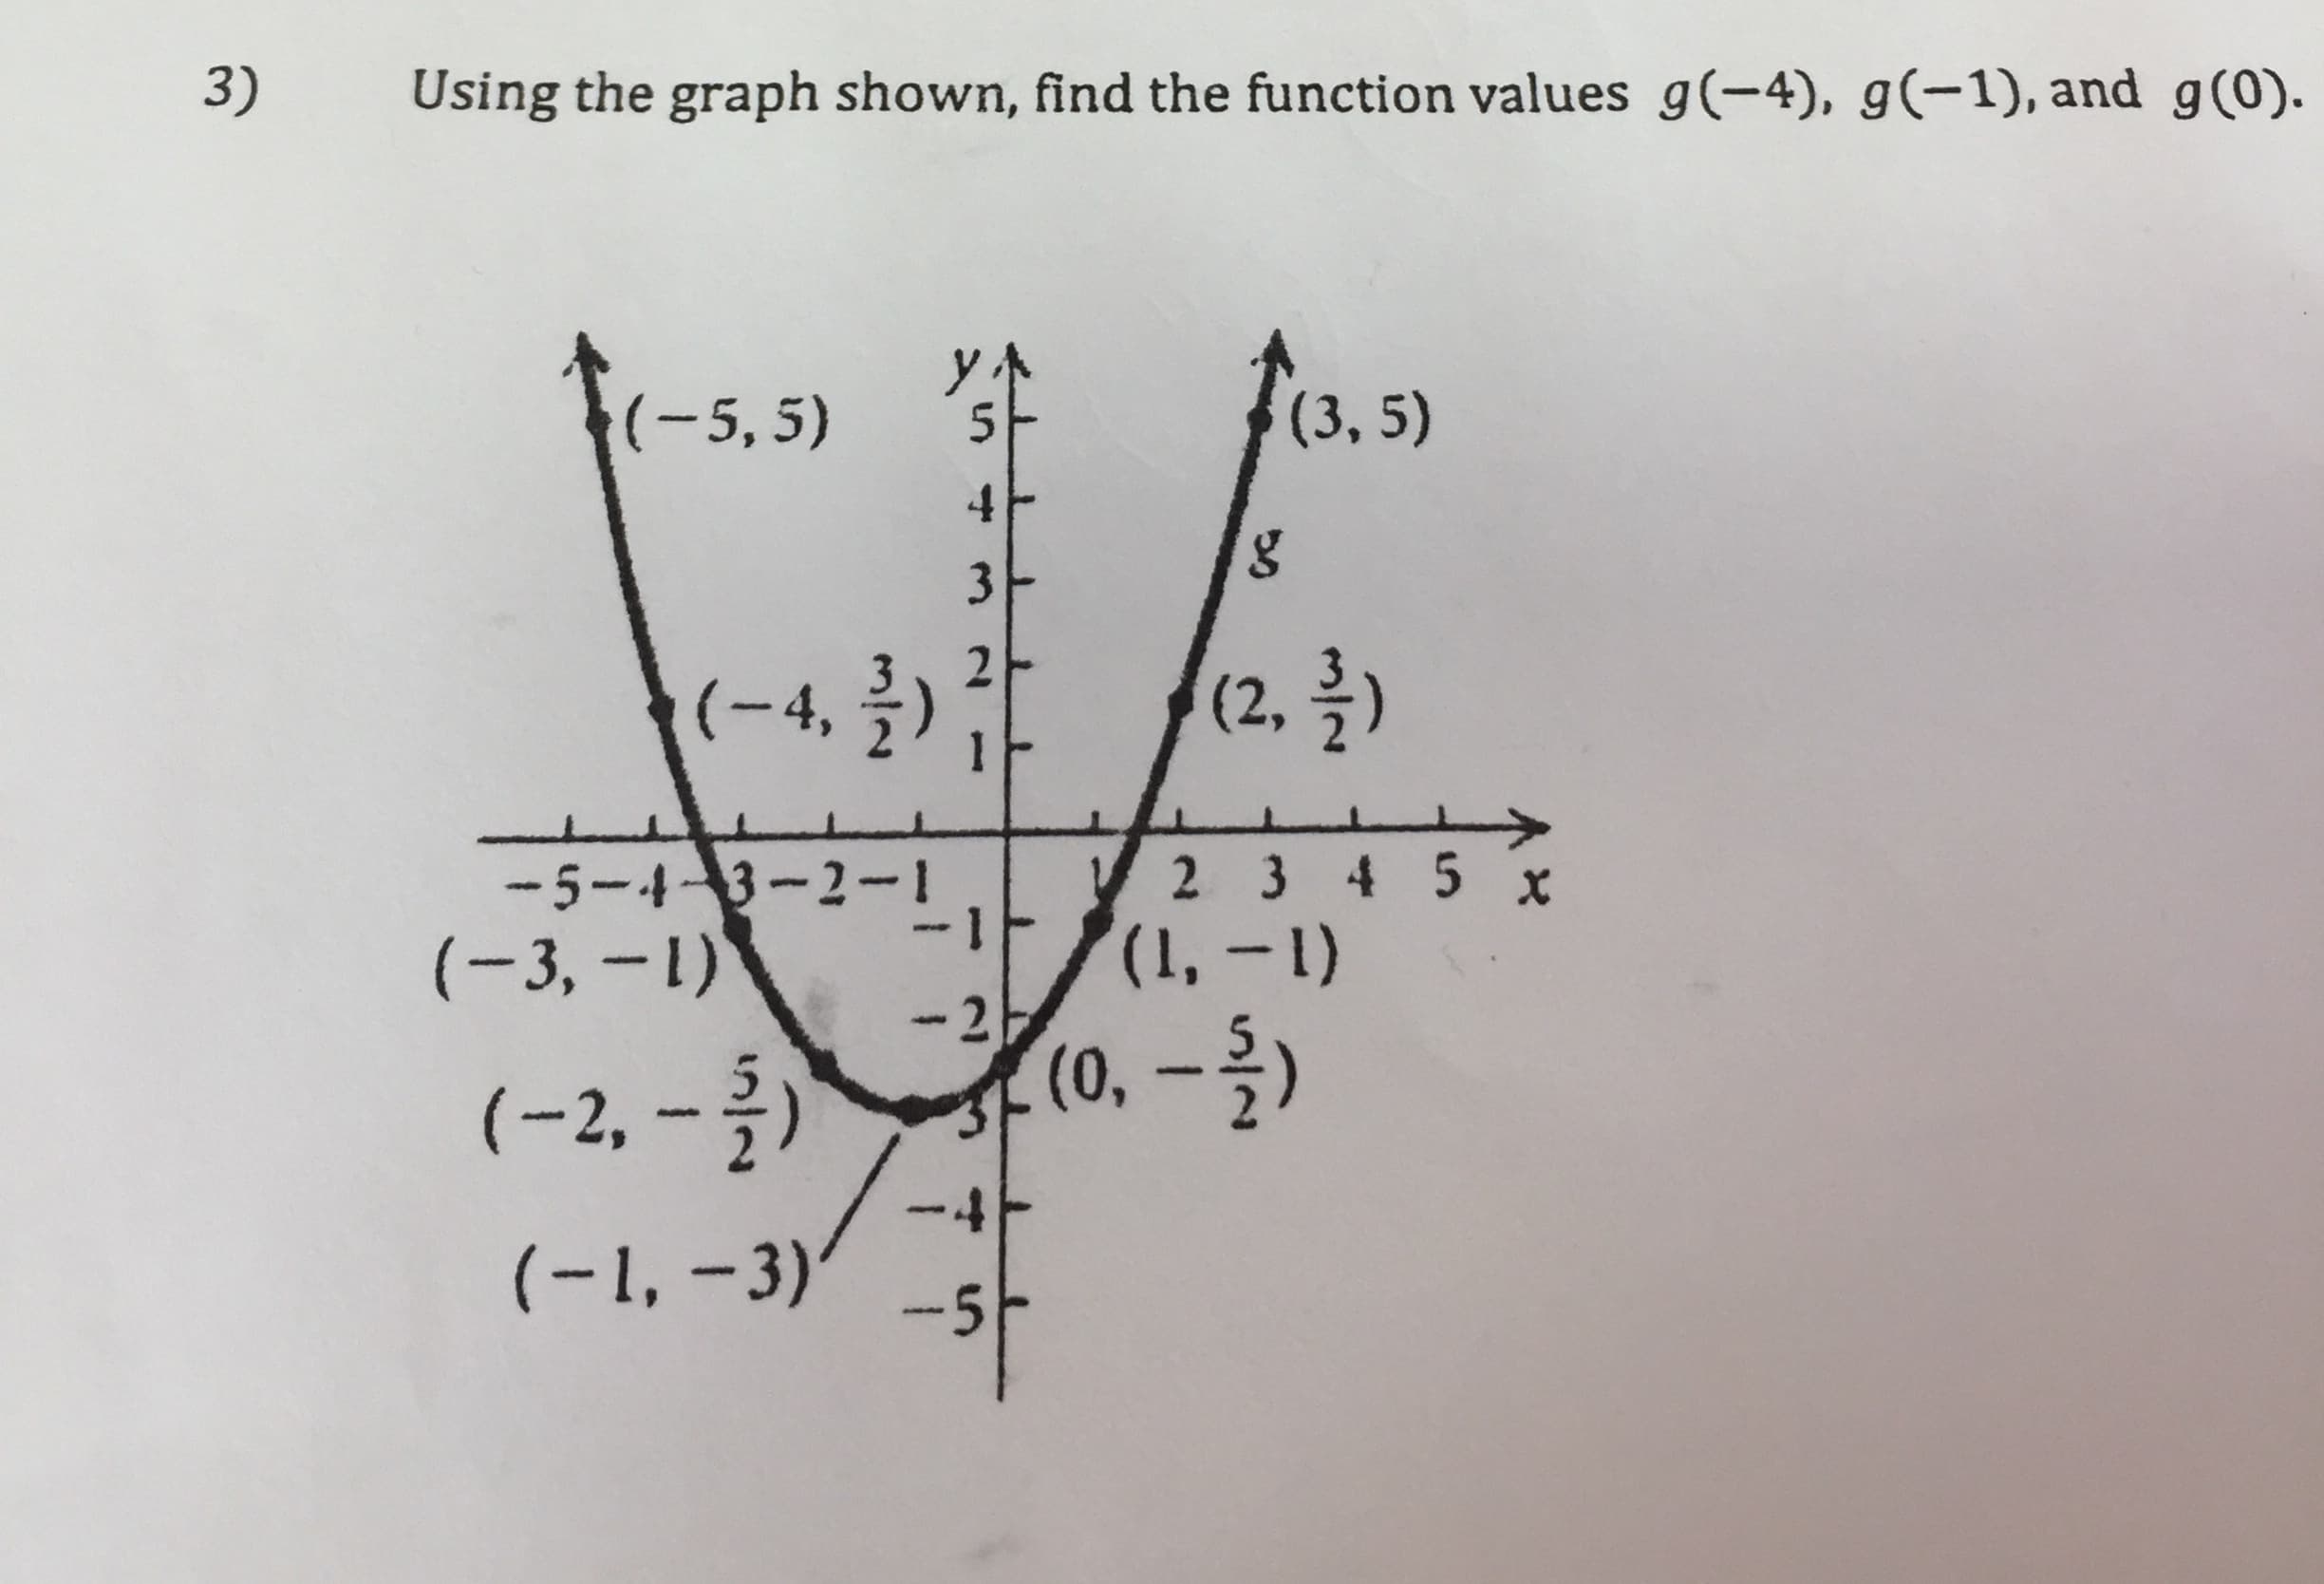 3)
Using the graph shown, find the function values g(-4), g(-1), and g(0).
ソト
(3, 5)
(-5,5)
(-4,)
(2,)
2 3 4 5 x
(1,-1)
-5-43-2-1
(-3, -1)
-2
(0,-)
(-2, -)
-4F
(-1, -3)*
-5-
